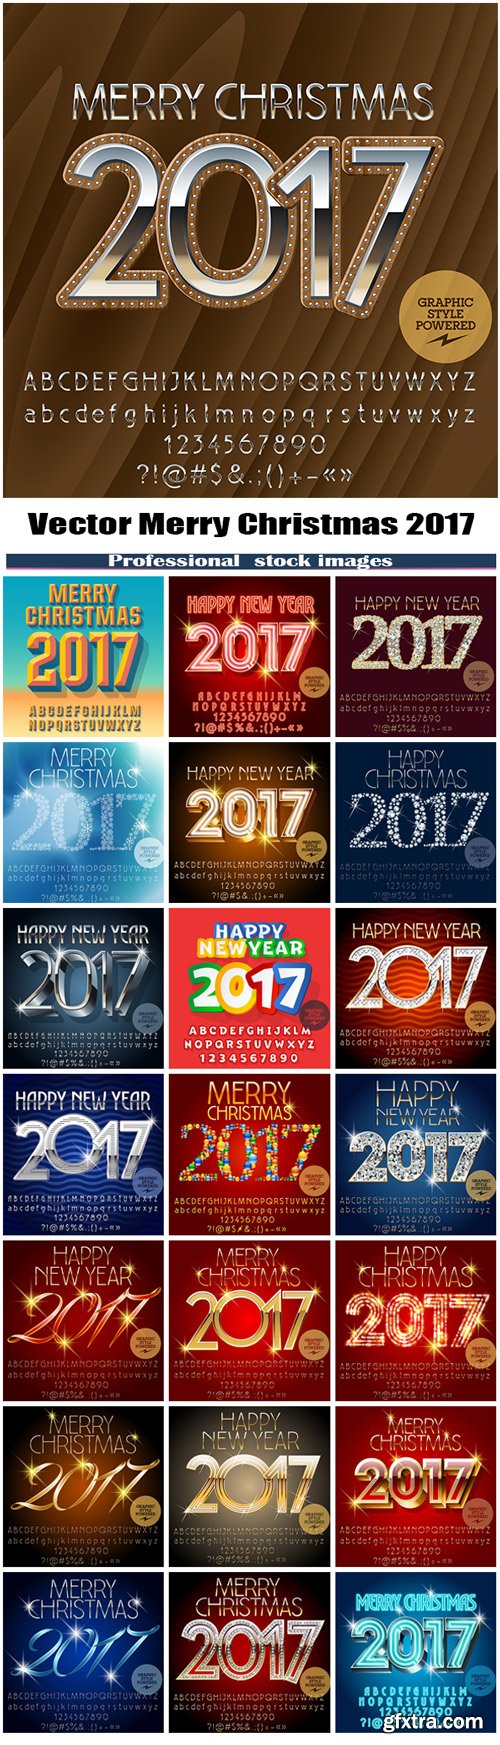 Vector Merry Christmas 2017 greeting card with set of letters, symbols and numbers